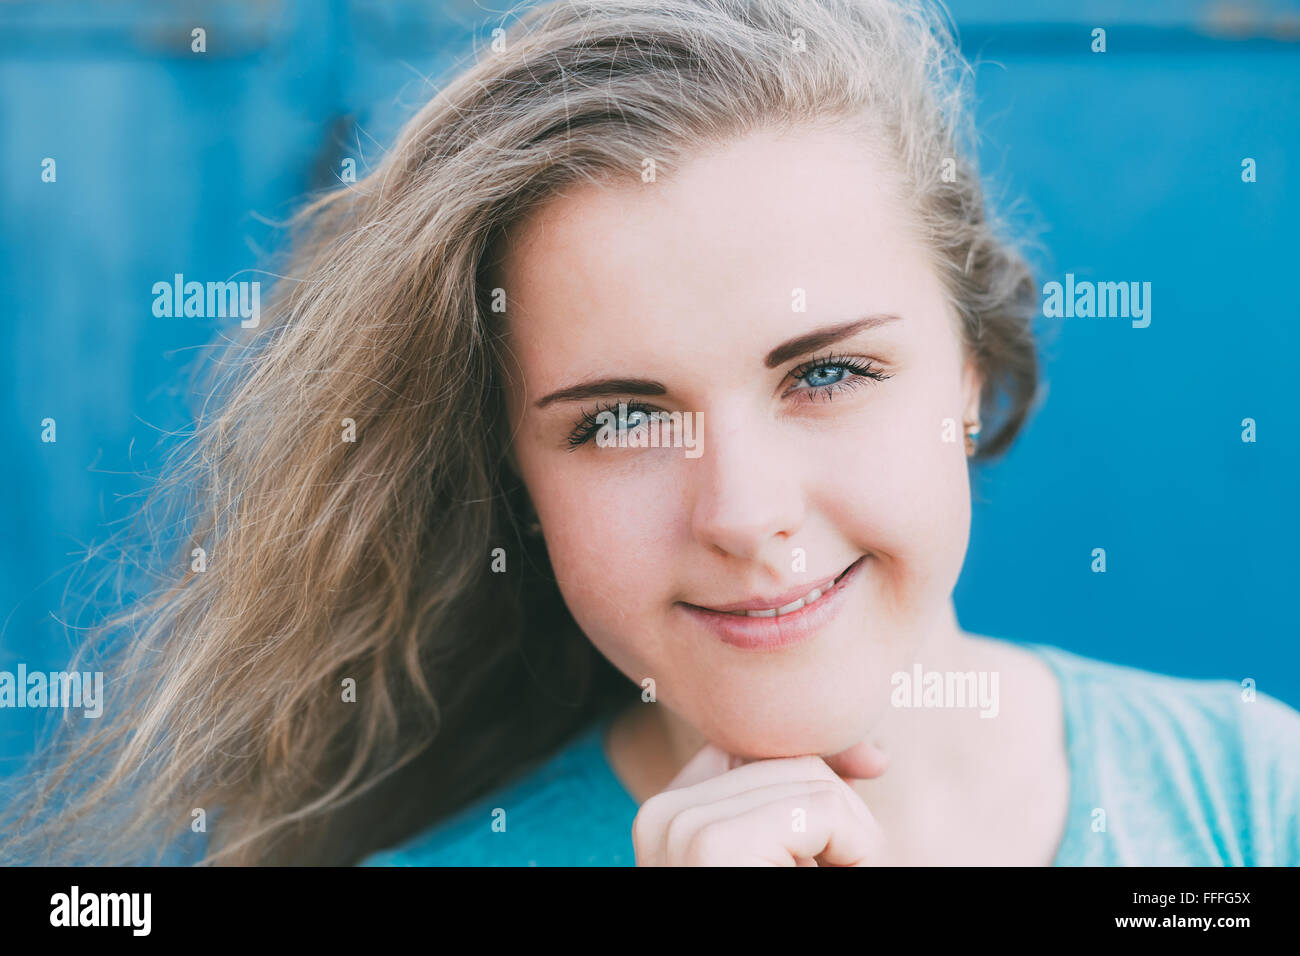 Close up Of Attractive Plus Size Young Woman. Girl smiling and looking at the camera Stock Photo